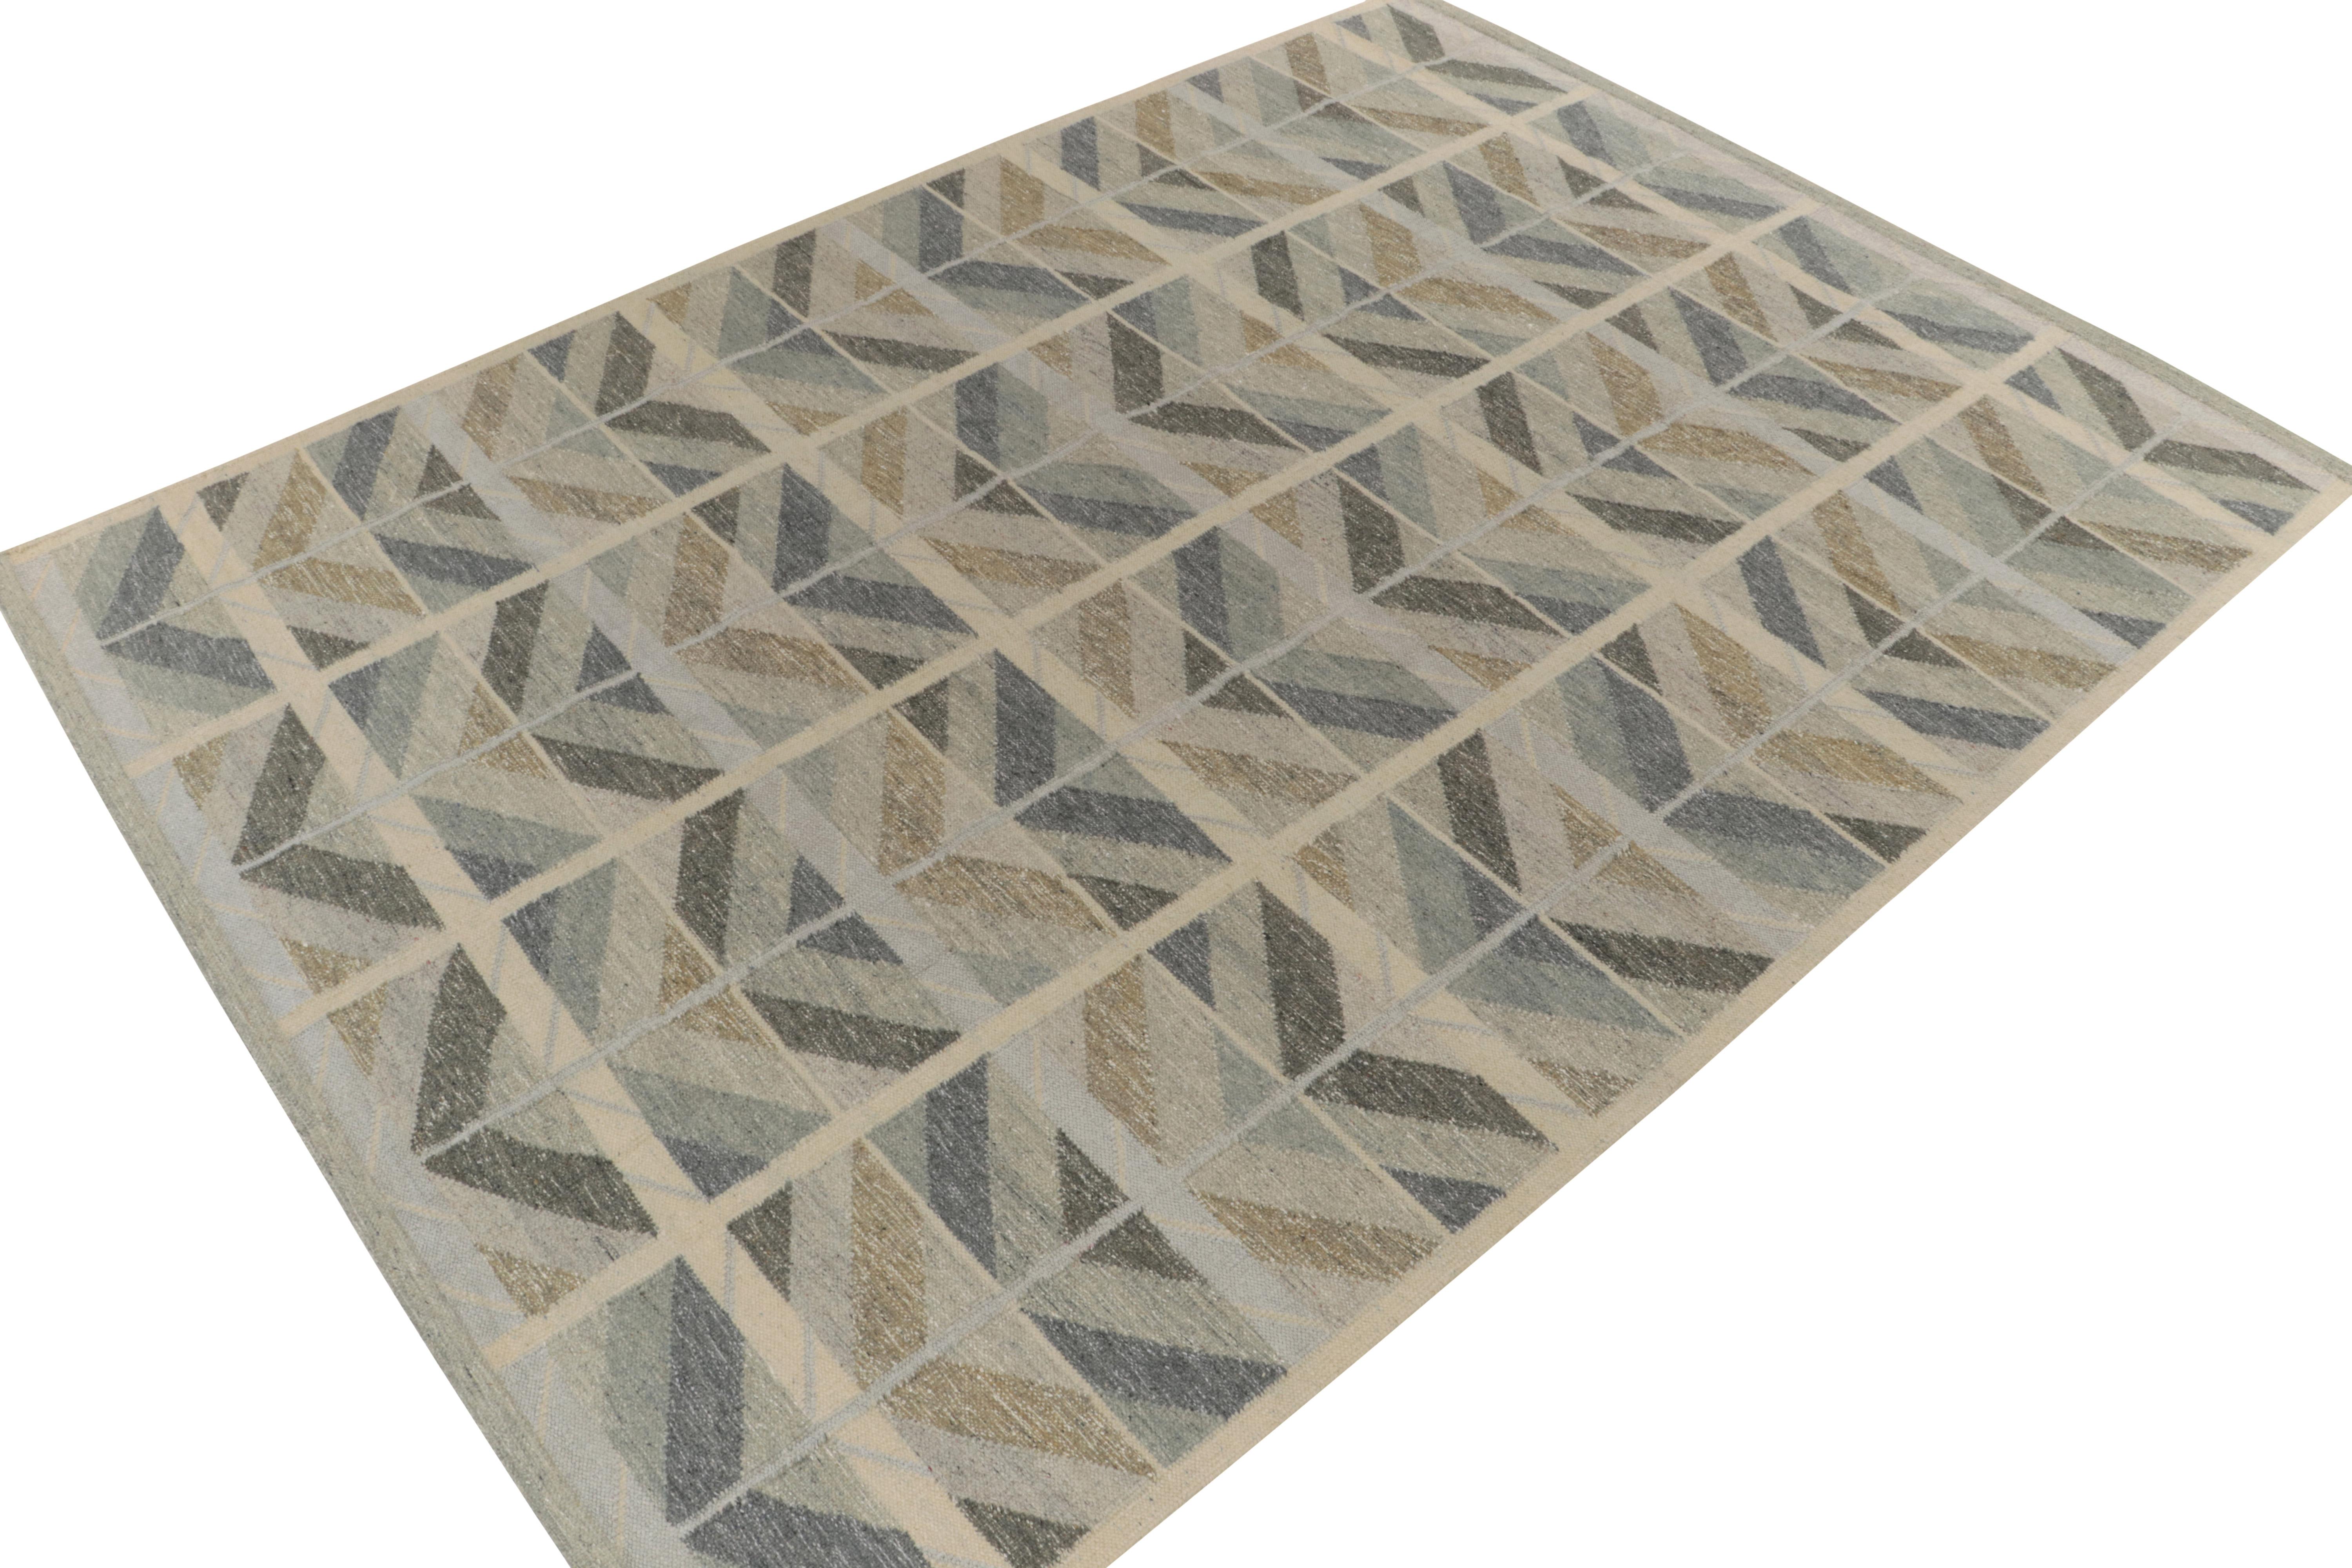 From our celebrated Scandinavian flat weaves, a 10x14 Swedish Deco style kilim exemplifying contemporary innovations of mid-century modern style. 

On the Design: Handwoven in wool, the crisp geometric chevrons enjoy smart alternating tones of